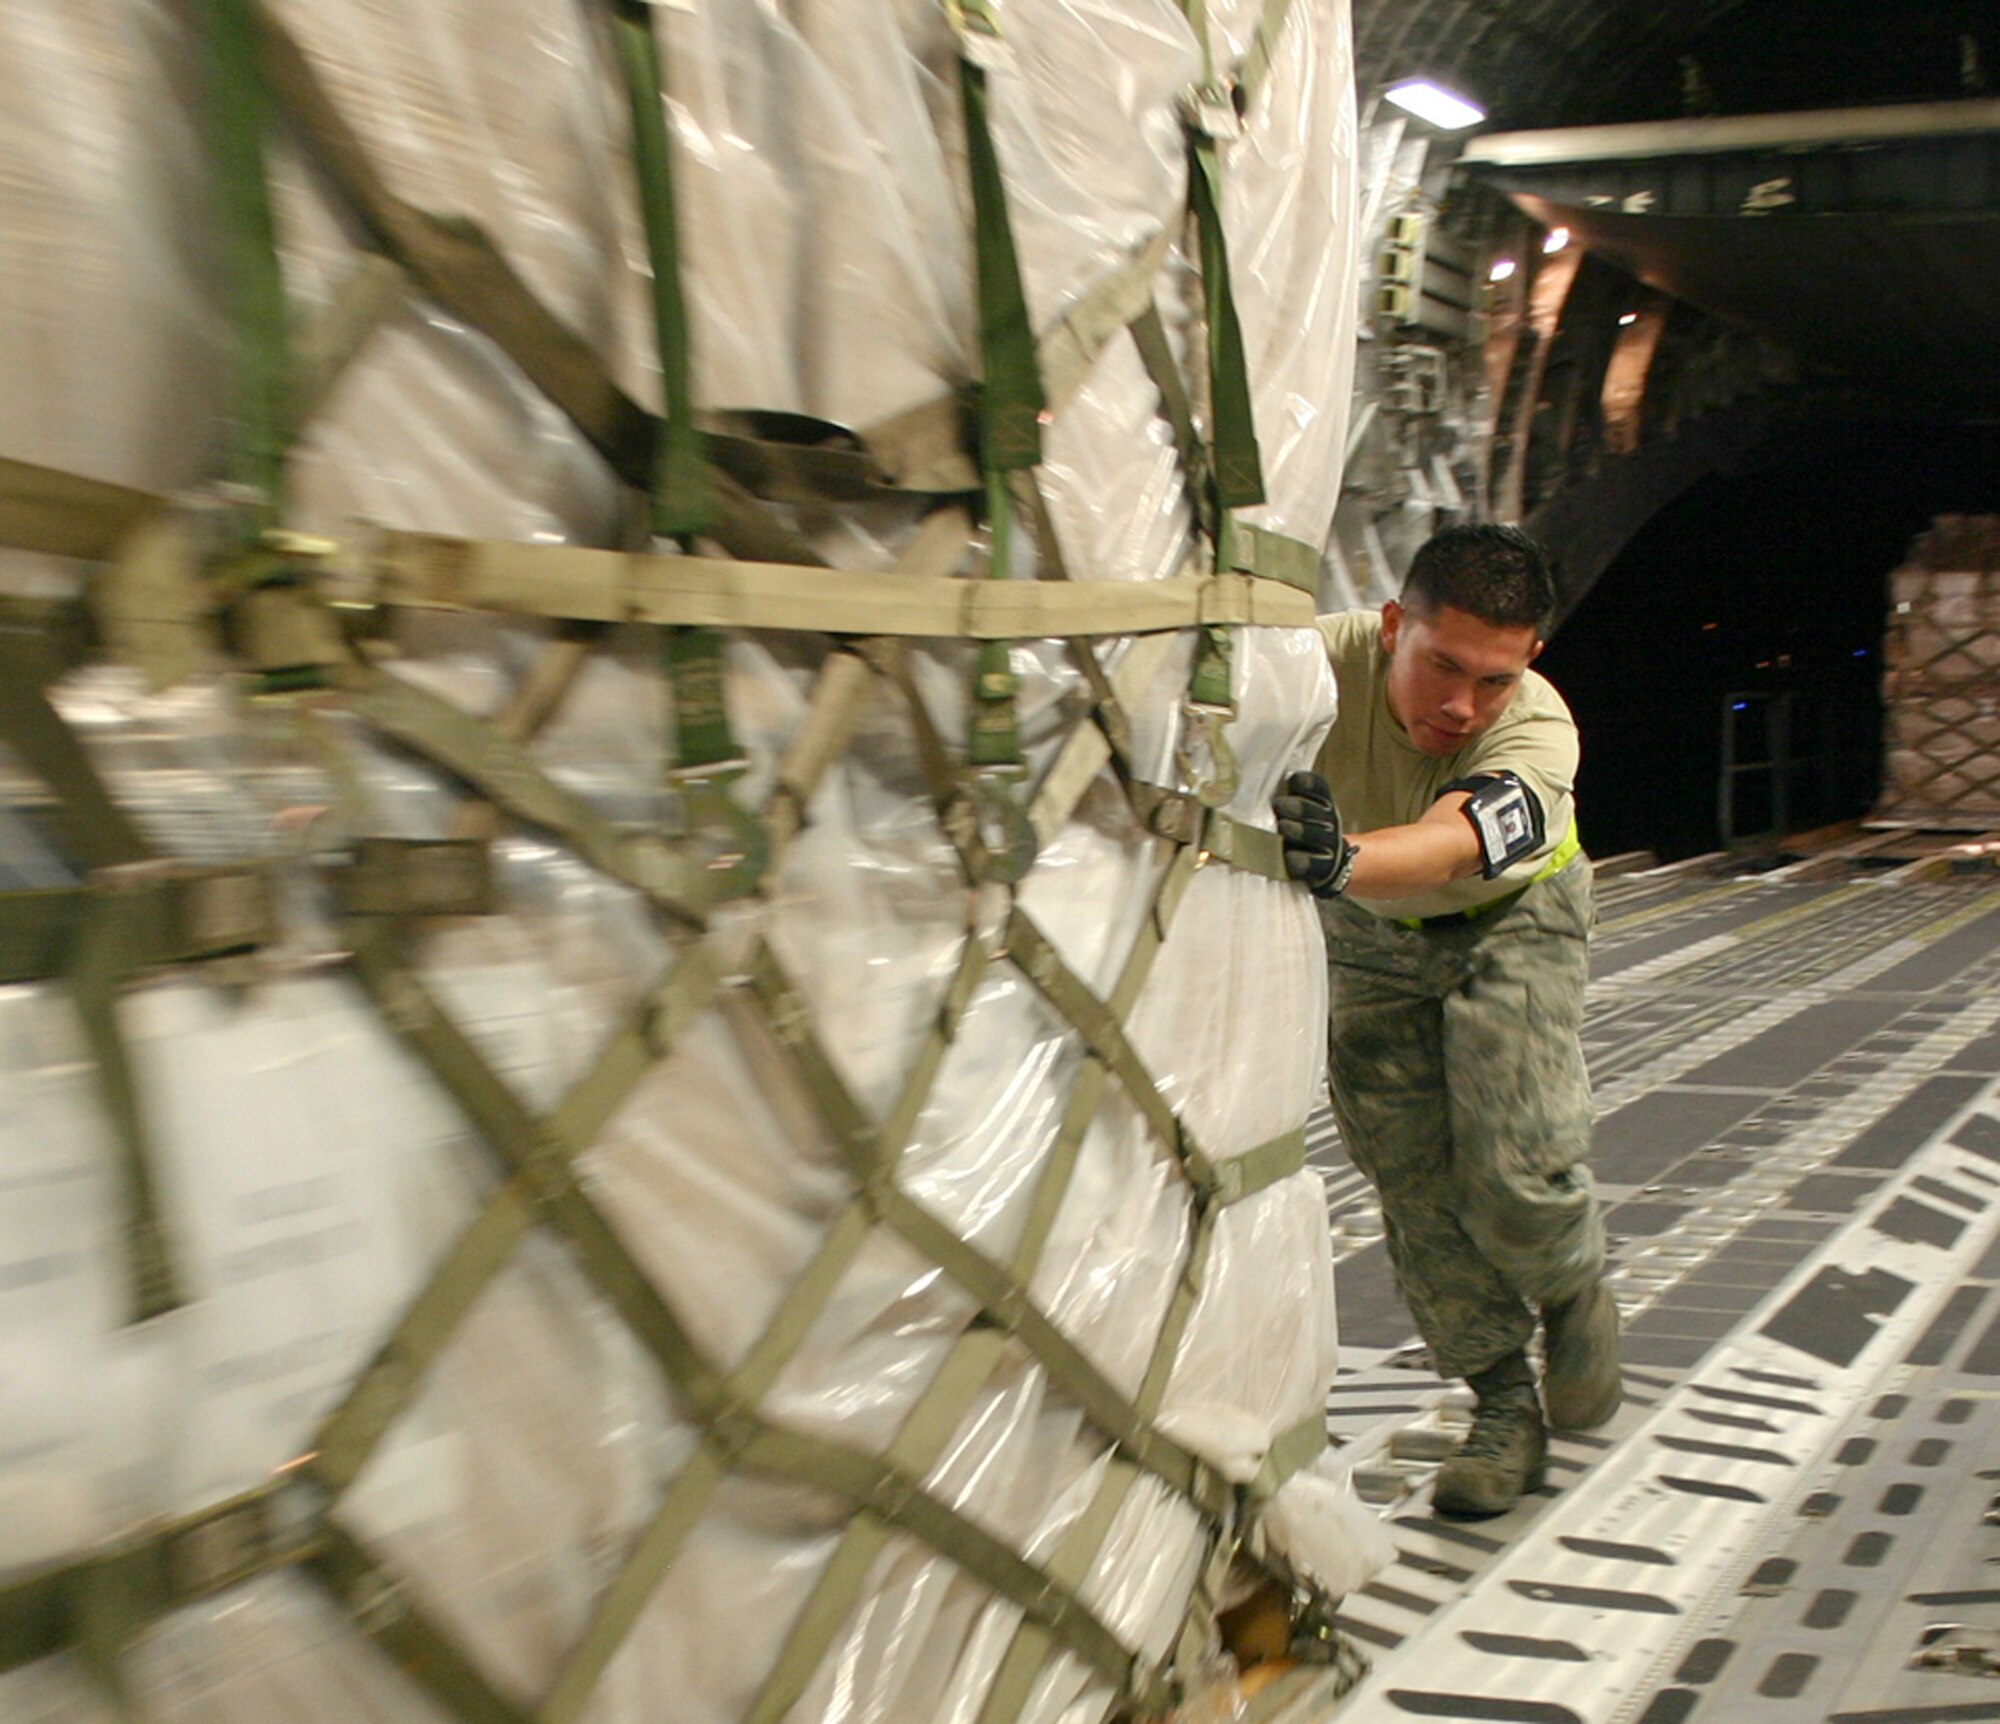 Air Cargo Specialist Senior Airman Rodrigo Maranon from the 437th Aerial Port Squadron pushes a pallet of personal protective kits into position aboard a C-17 Globemaster III at Charleston Air Force Base, S.C., May 8. The kits are part of a U.S. Agency for International Development shipment to Haiti, Guatemala, Honduras, El Salvador, Nicaragua and Belize to help these nations prepare for a potential outbreak of the H1N1 influenza virus. (U.S. Air Force photo/Raymond Sarracino)